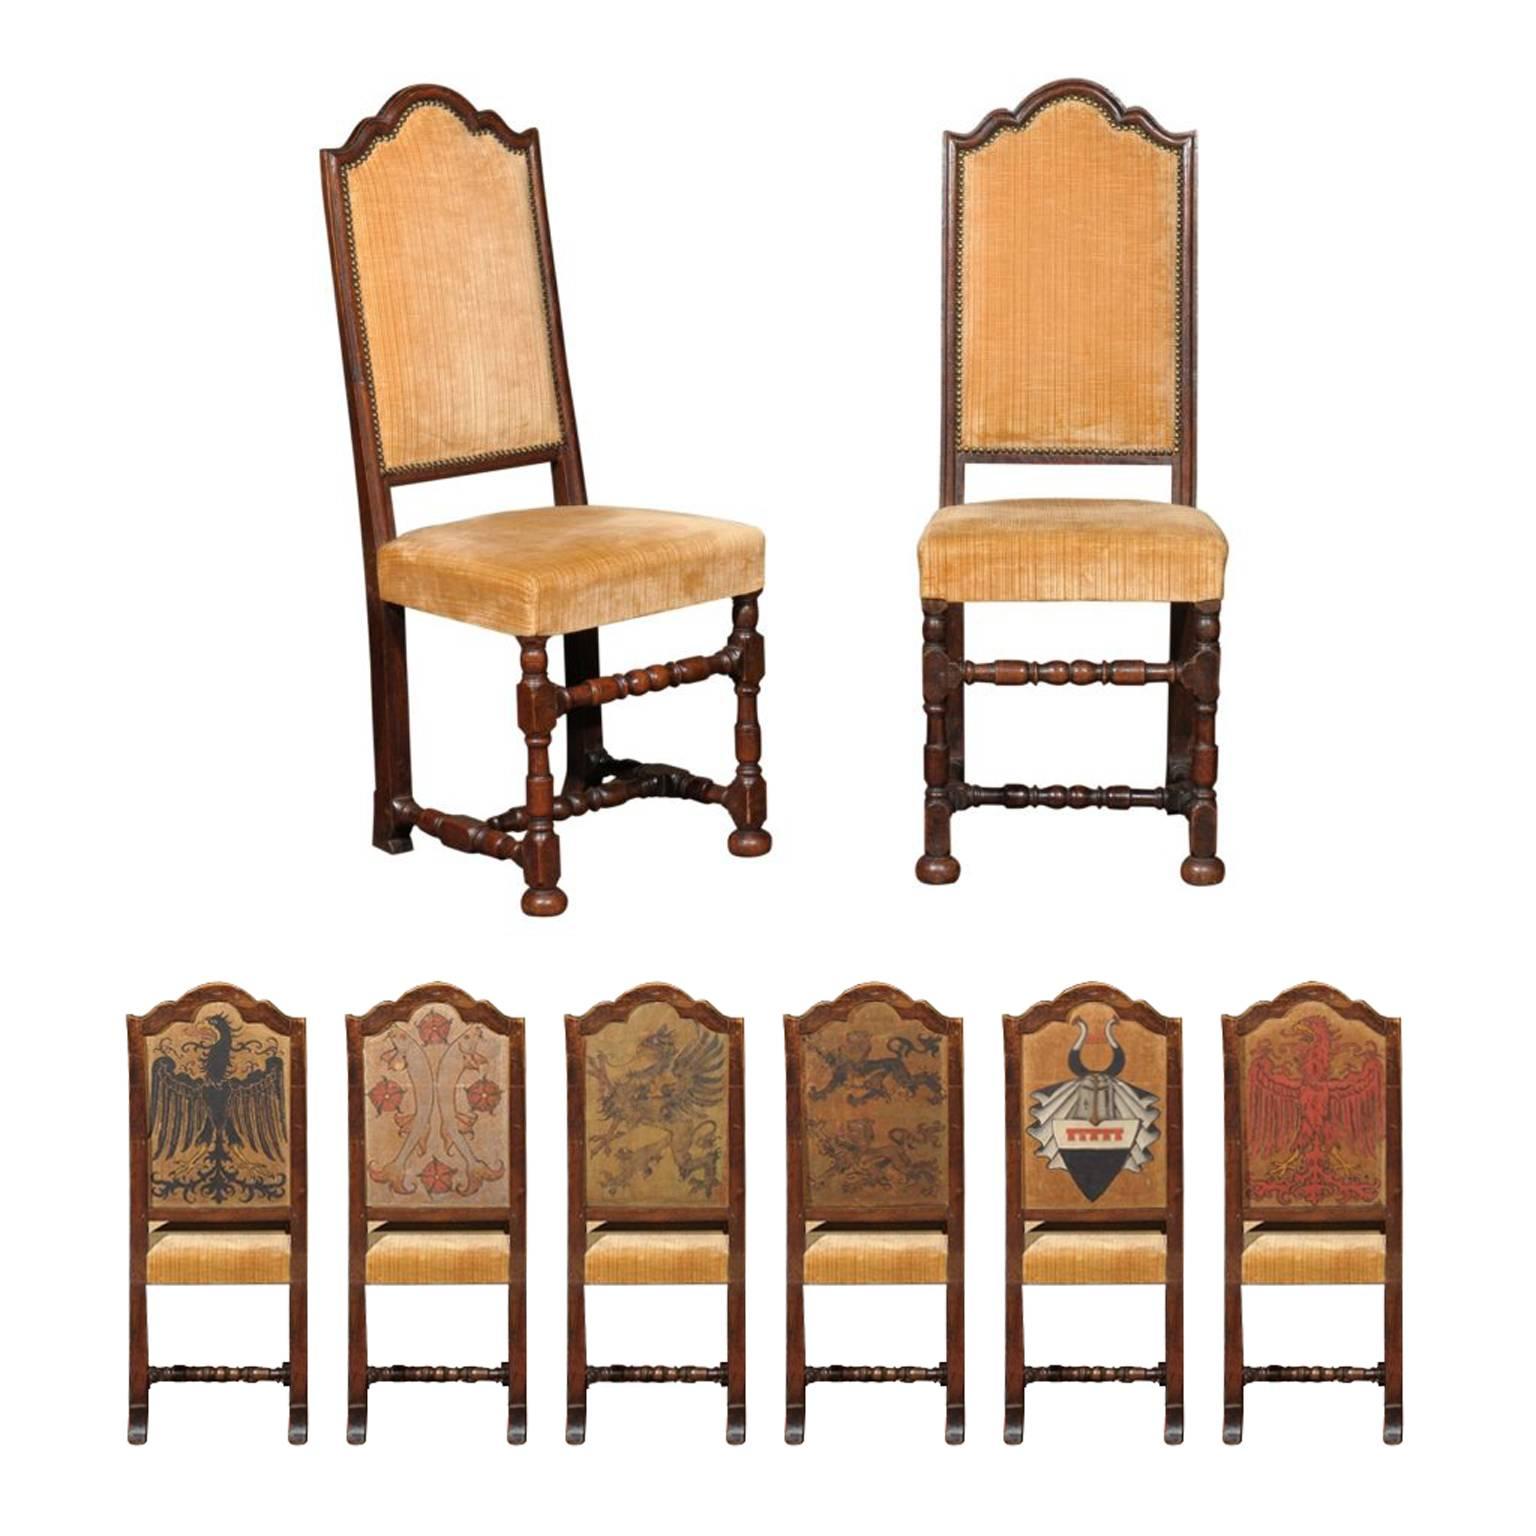 Set of mid-19th century Florentine dining chairs, the shaped open back seat surmounting a conforming seat upholstered in yellow velvet and raised on straight and turned legs with a conforming stretcher, each with a hand-painted family crest on the